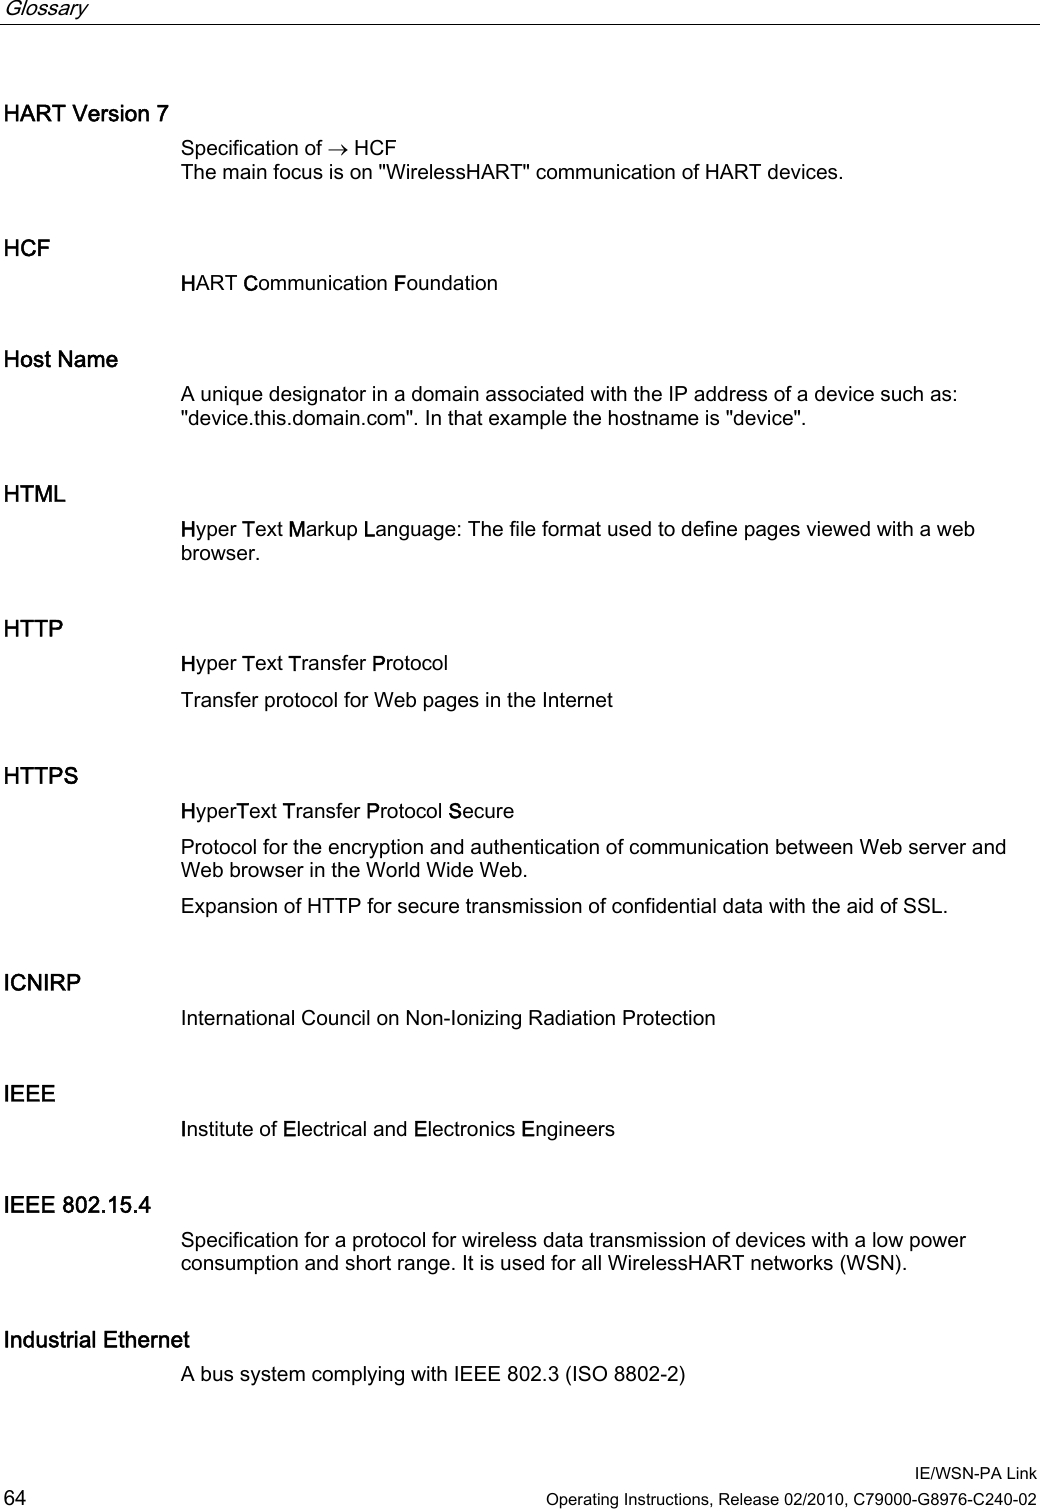 Glossary      IE/WSN-PA Link 64  Operating Instructions, Release 02/2010, C79000-G8976-C240-02 HART Version 7 Specification of  HCF The main focus is on &quot;WirelessHART&quot; communication of HART devices. HCF HART Communication Foundation Host Name A unique designator in a domain associated with the IP address of a device such as: &quot;device.this.domain.com&quot;. In that example the hostname is &quot;device&quot;. HTML Hyper Text Markup Language: The file format used to define pages viewed with a web browser. HTTP Hyper Text Transfer Protocol Transfer protocol for Web pages in the Internet HTTPS HyperText Transfer Protocol Secure Protocol for the encryption and authentication of communication between Web server and Web browser in the World Wide Web.  Expansion of HTTP for secure transmission of confidential data with the aid of SSL. ICNIRP International Council on Non-Ionizing Radiation Protection IEEE Institute of Electrical and Electronics Engineers IEEE 802.15.4 Specification for a protocol for wireless data transmission of devices with a low power consumption and short range. It is used for all WirelessHART networks (WSN). Industrial Ethernet A bus system complying with IEEE 802.3 (ISO 8802-2) 